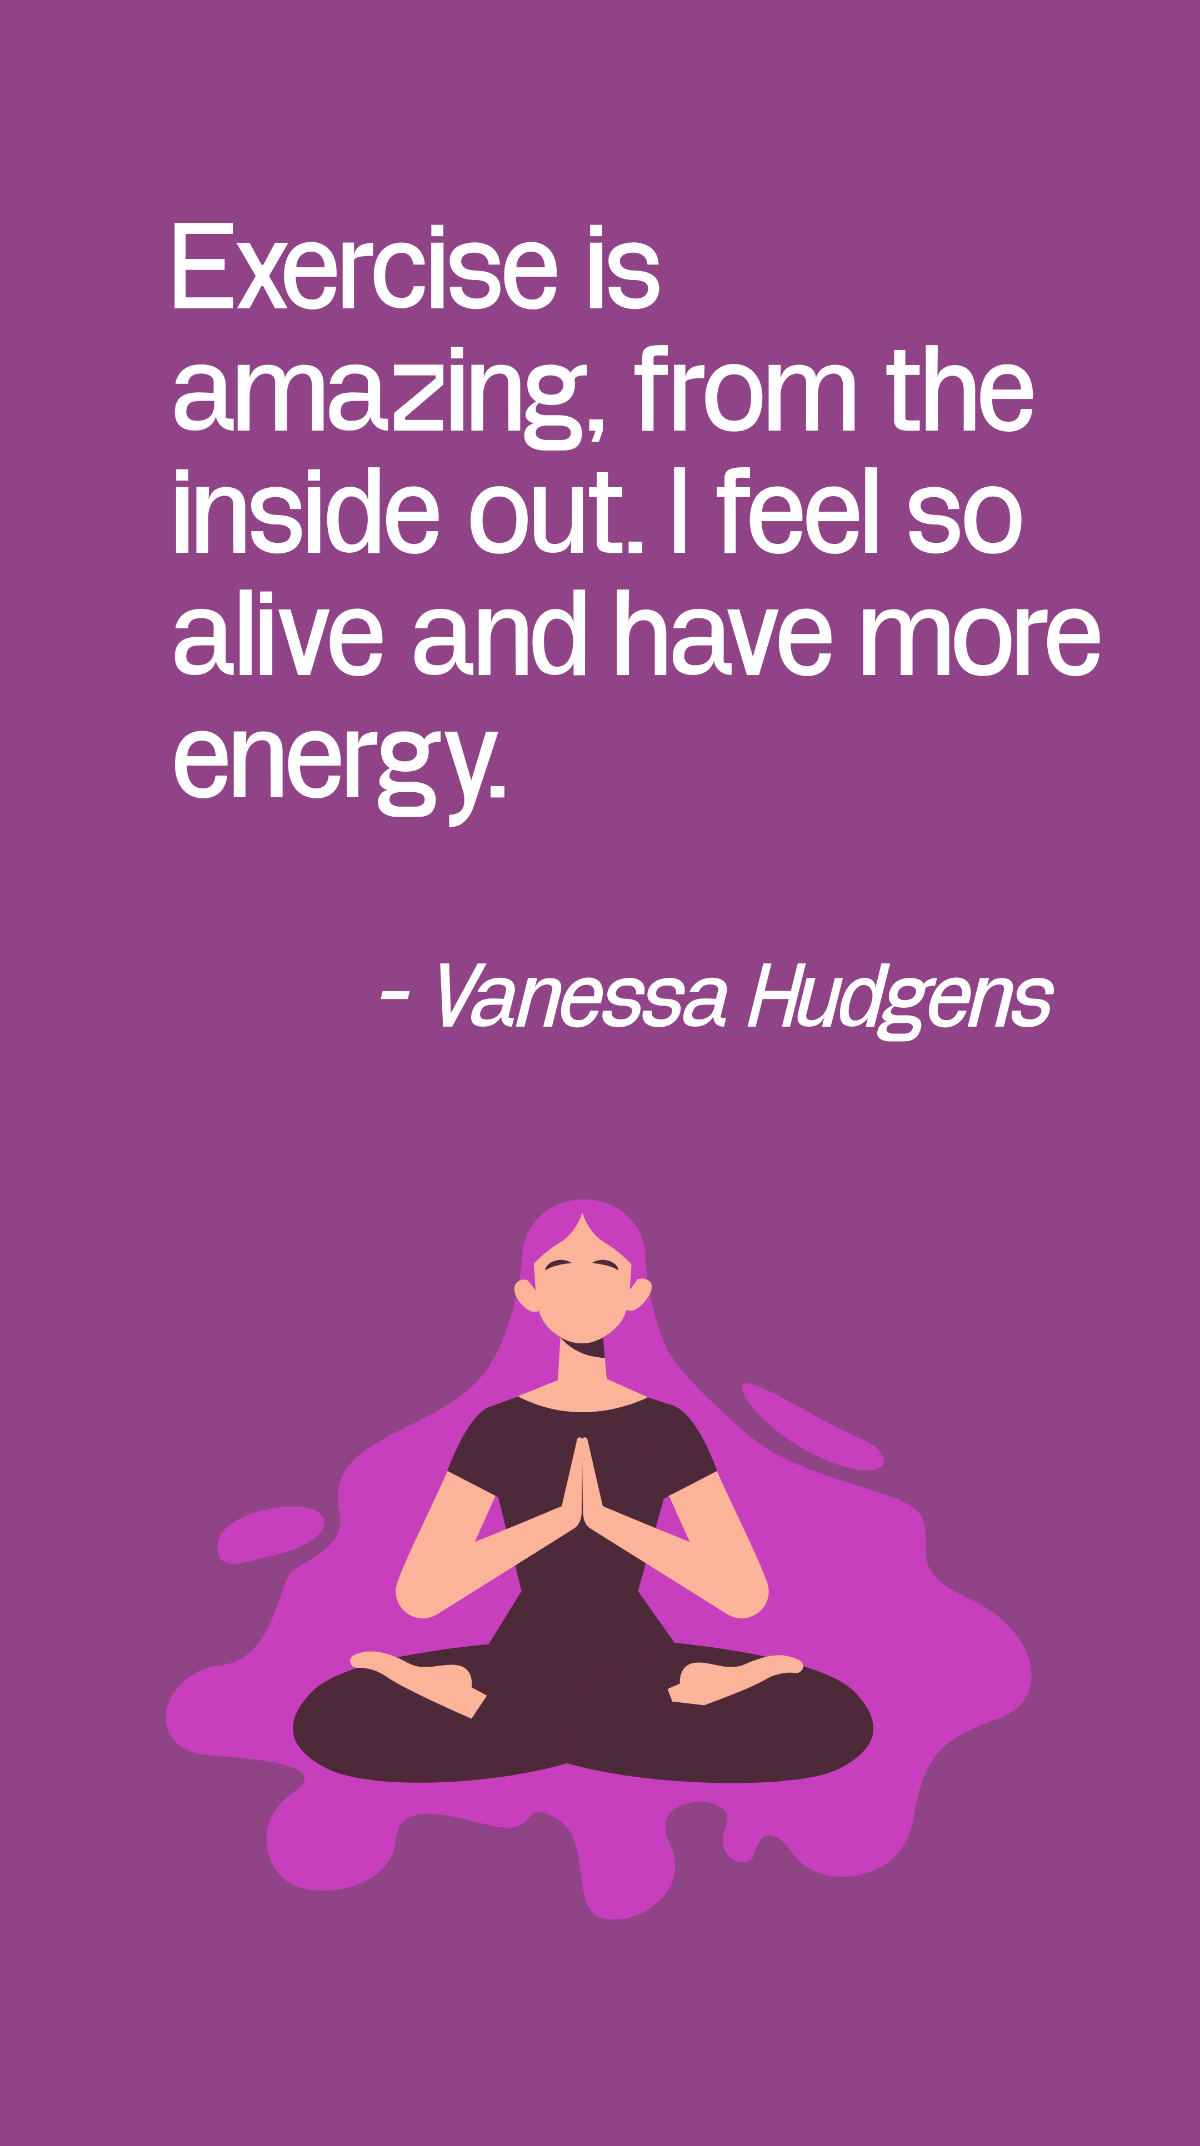 Free Vanessa Hudgens - Exercise is amazing, from the inside out. I feel so alive and have more energy. Template